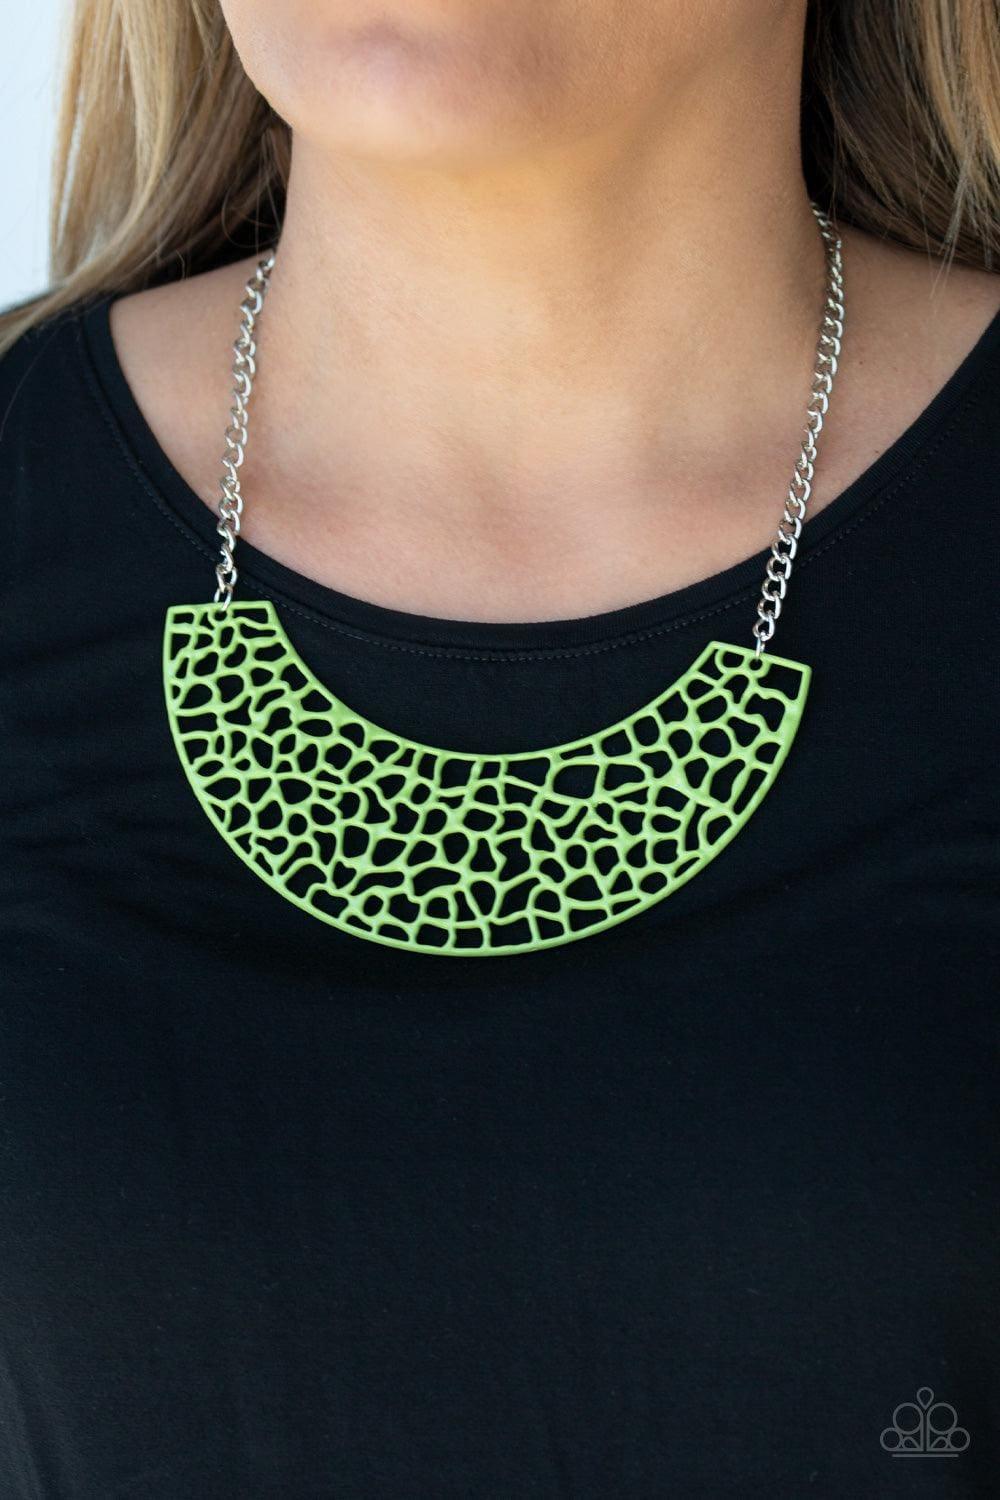 Paparazzi Accessories - Powerful Prowl - Green Necklace - Bling by JessieK